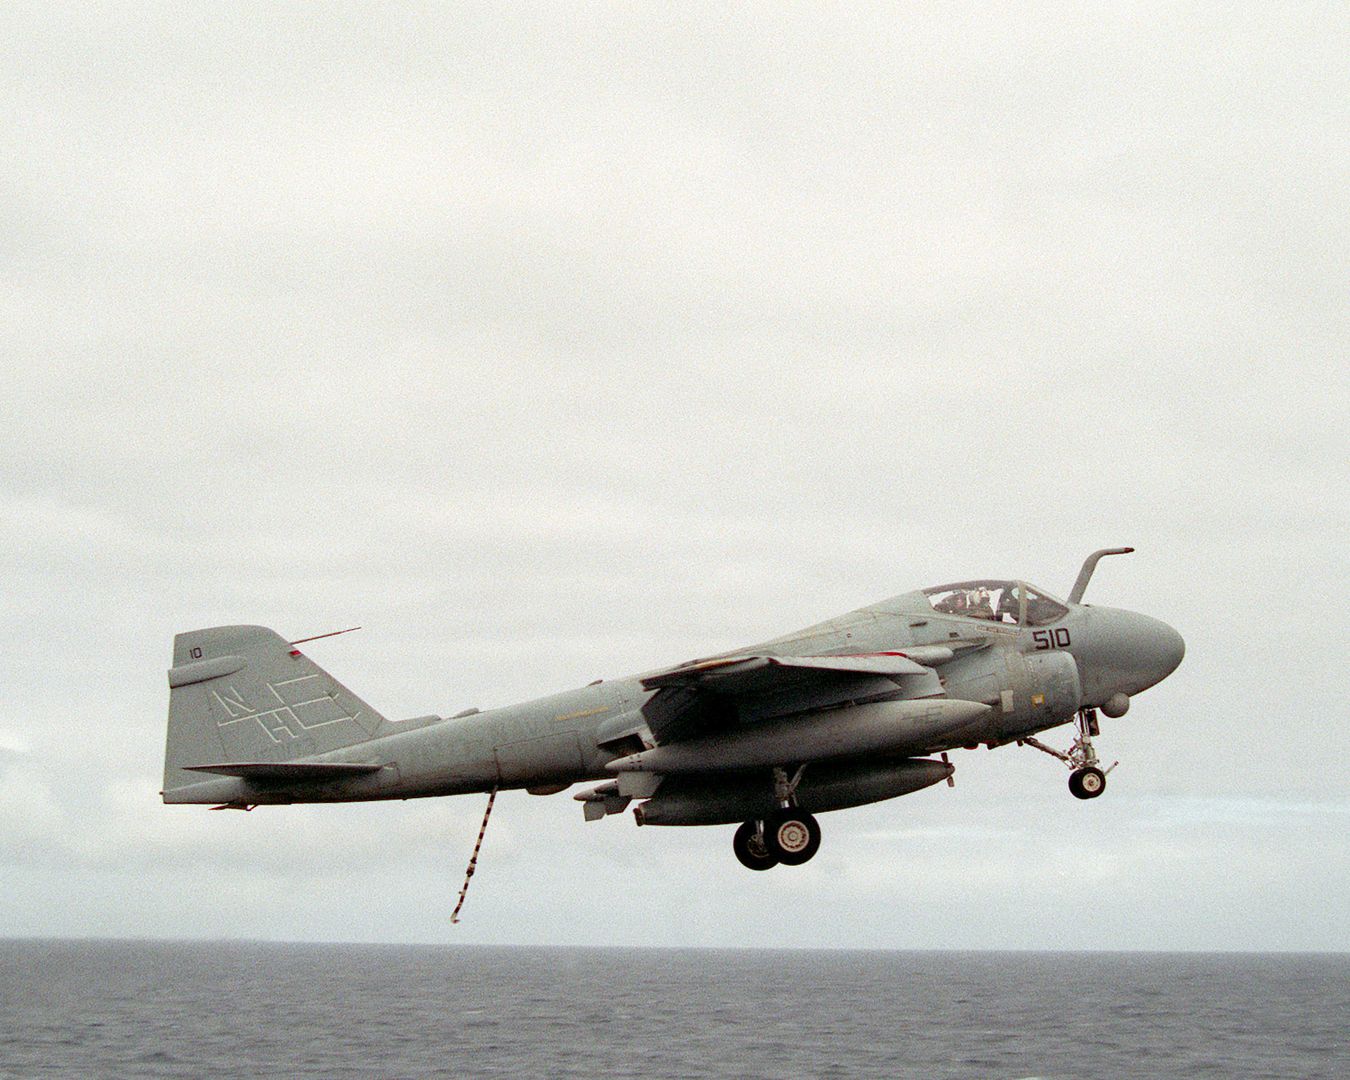 An Attack Squadron 95 A 6E Intruder Aircraft Flies Off After Missing The Arresting Wire On The Flight Deck Of The Nuclear Powered Aircraft Carrier USS ABRAHAM LINCOLN